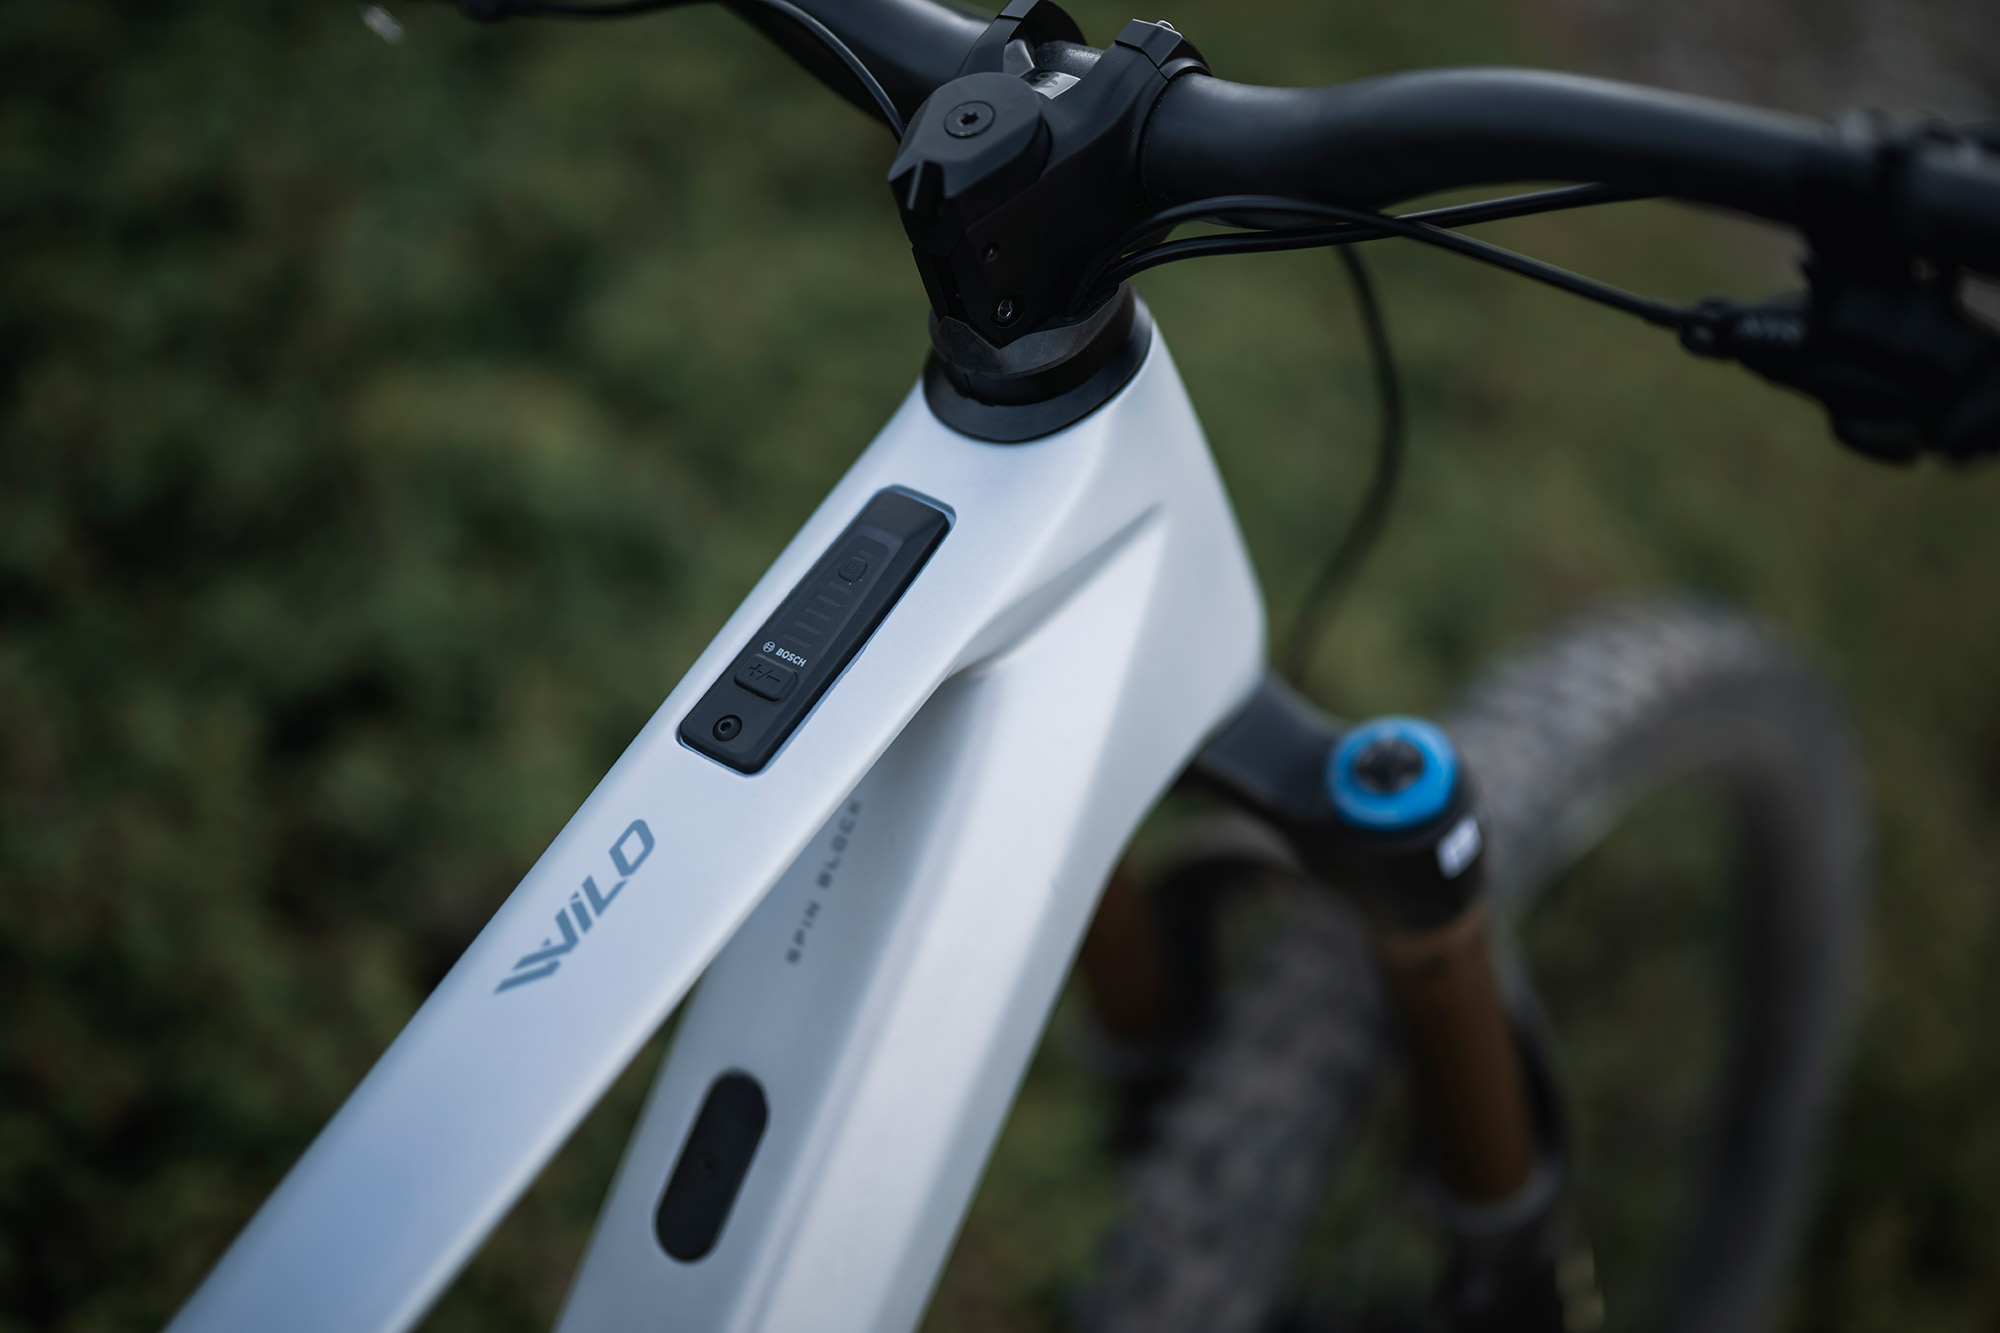 The Bosch controller gets low-profile integration into the frame’s toptube.